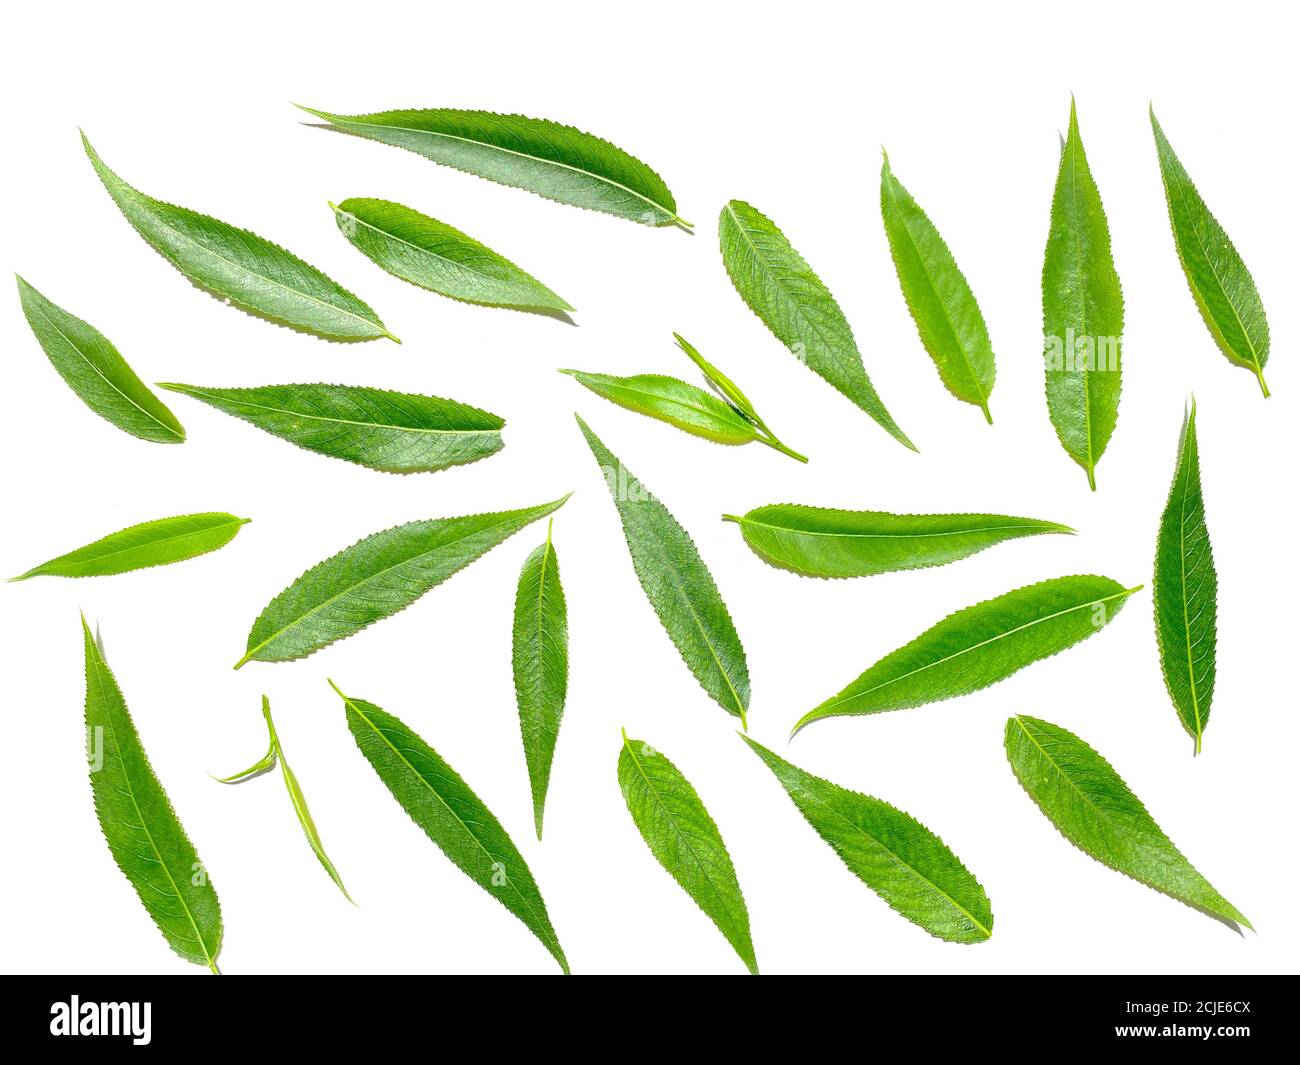 Green willow leaves on a white background Stock Photo